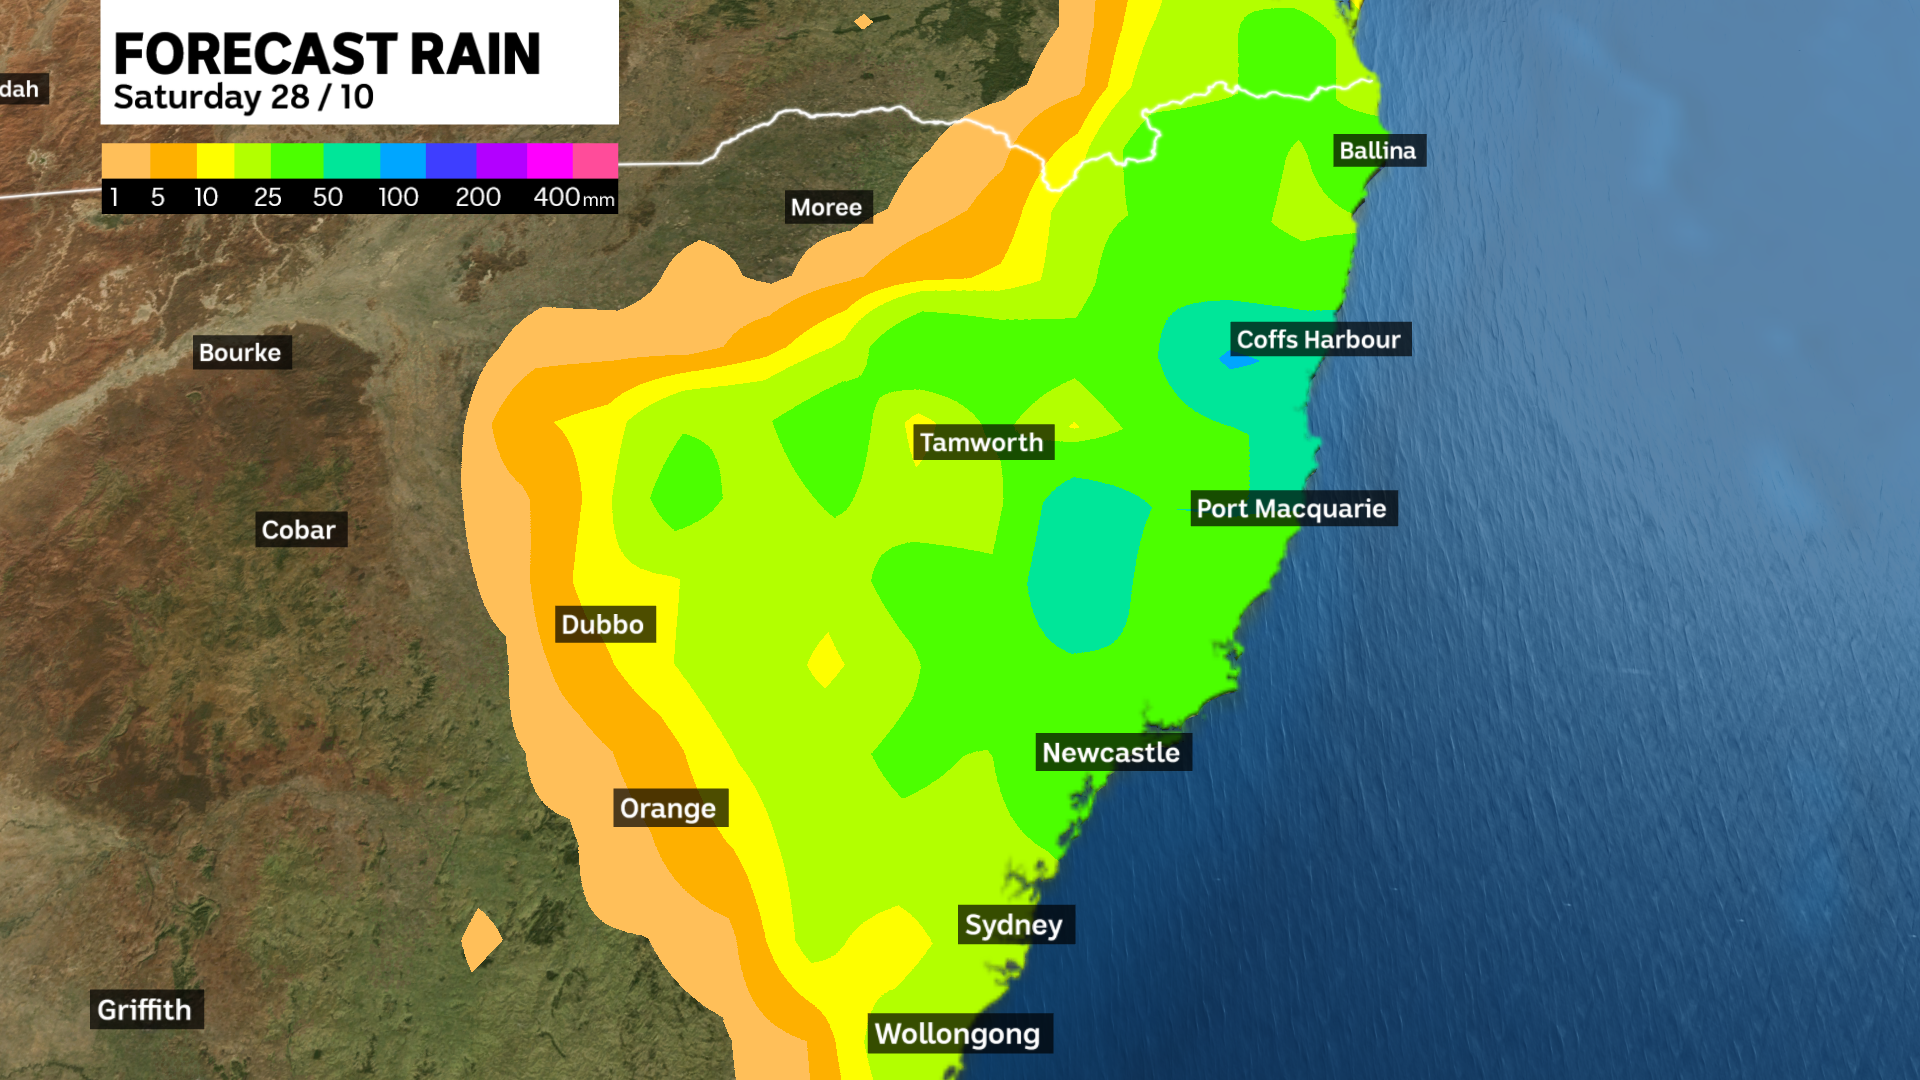 Forecast map of rain over NSW